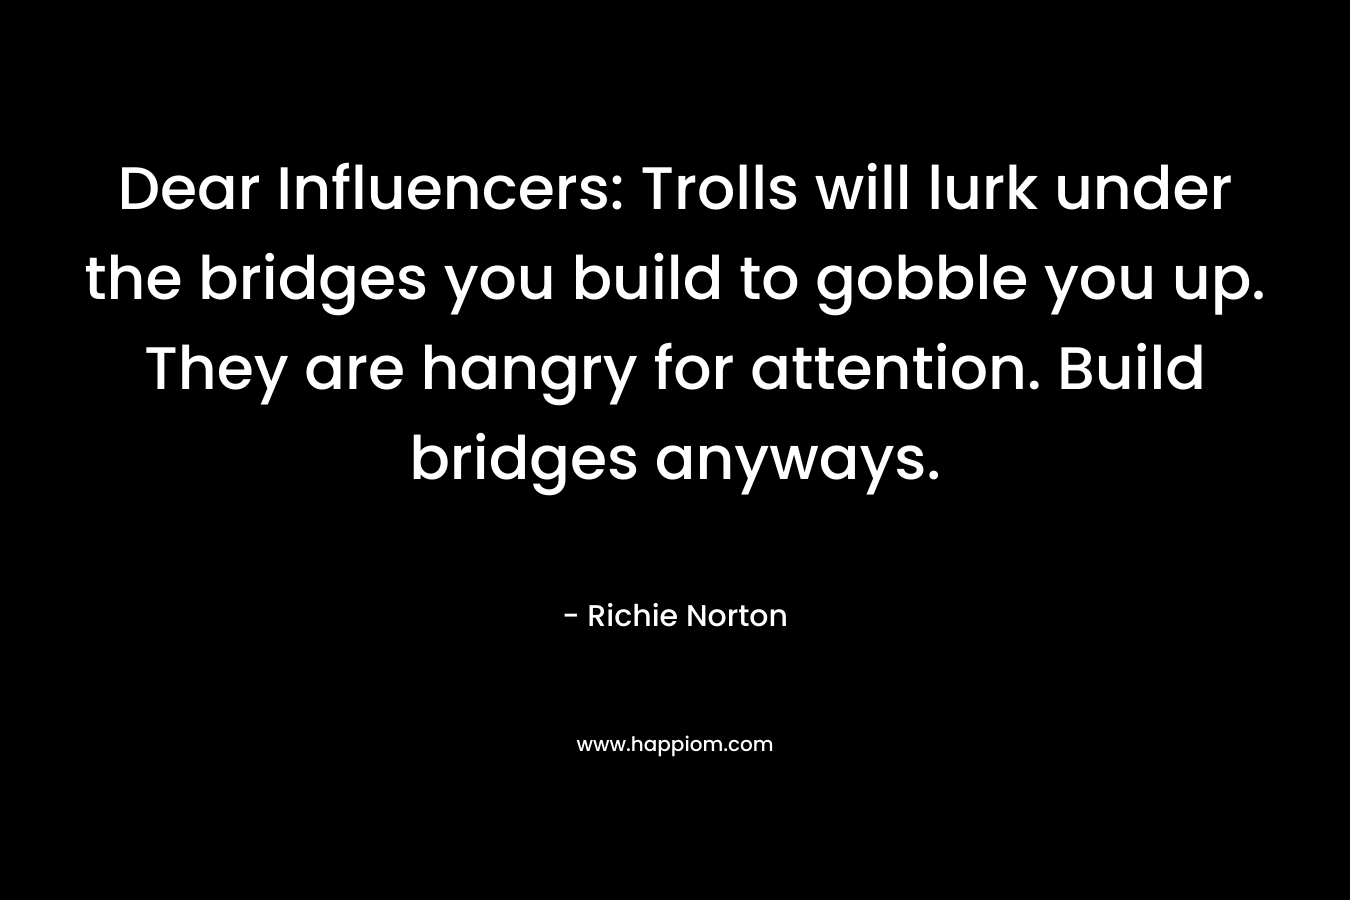 Dear Influencers: Trolls will lurk under the bridges you build to gobble you up. They are hangry for attention. Build bridges anyways. – Richie Norton